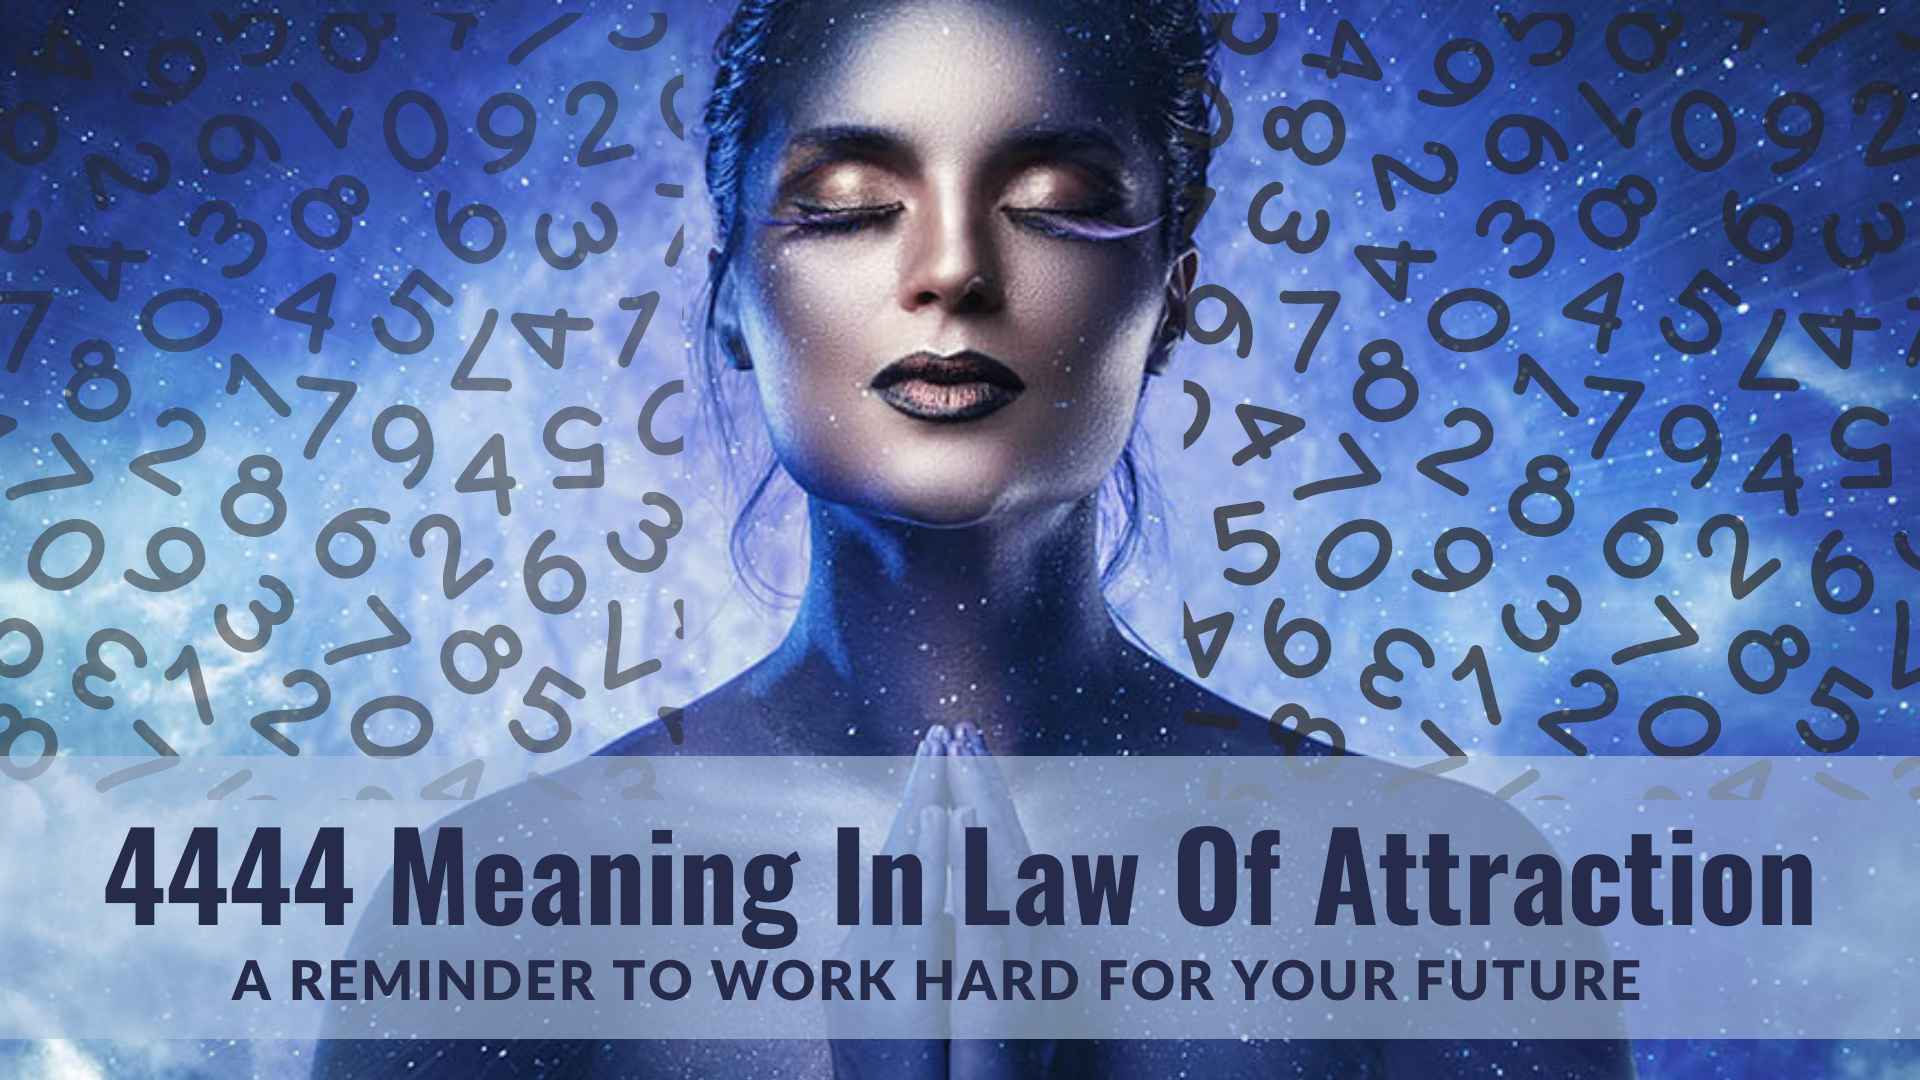 4444 Meaning In Law Of Attraction - A Reminder To Work Hard For Your Future